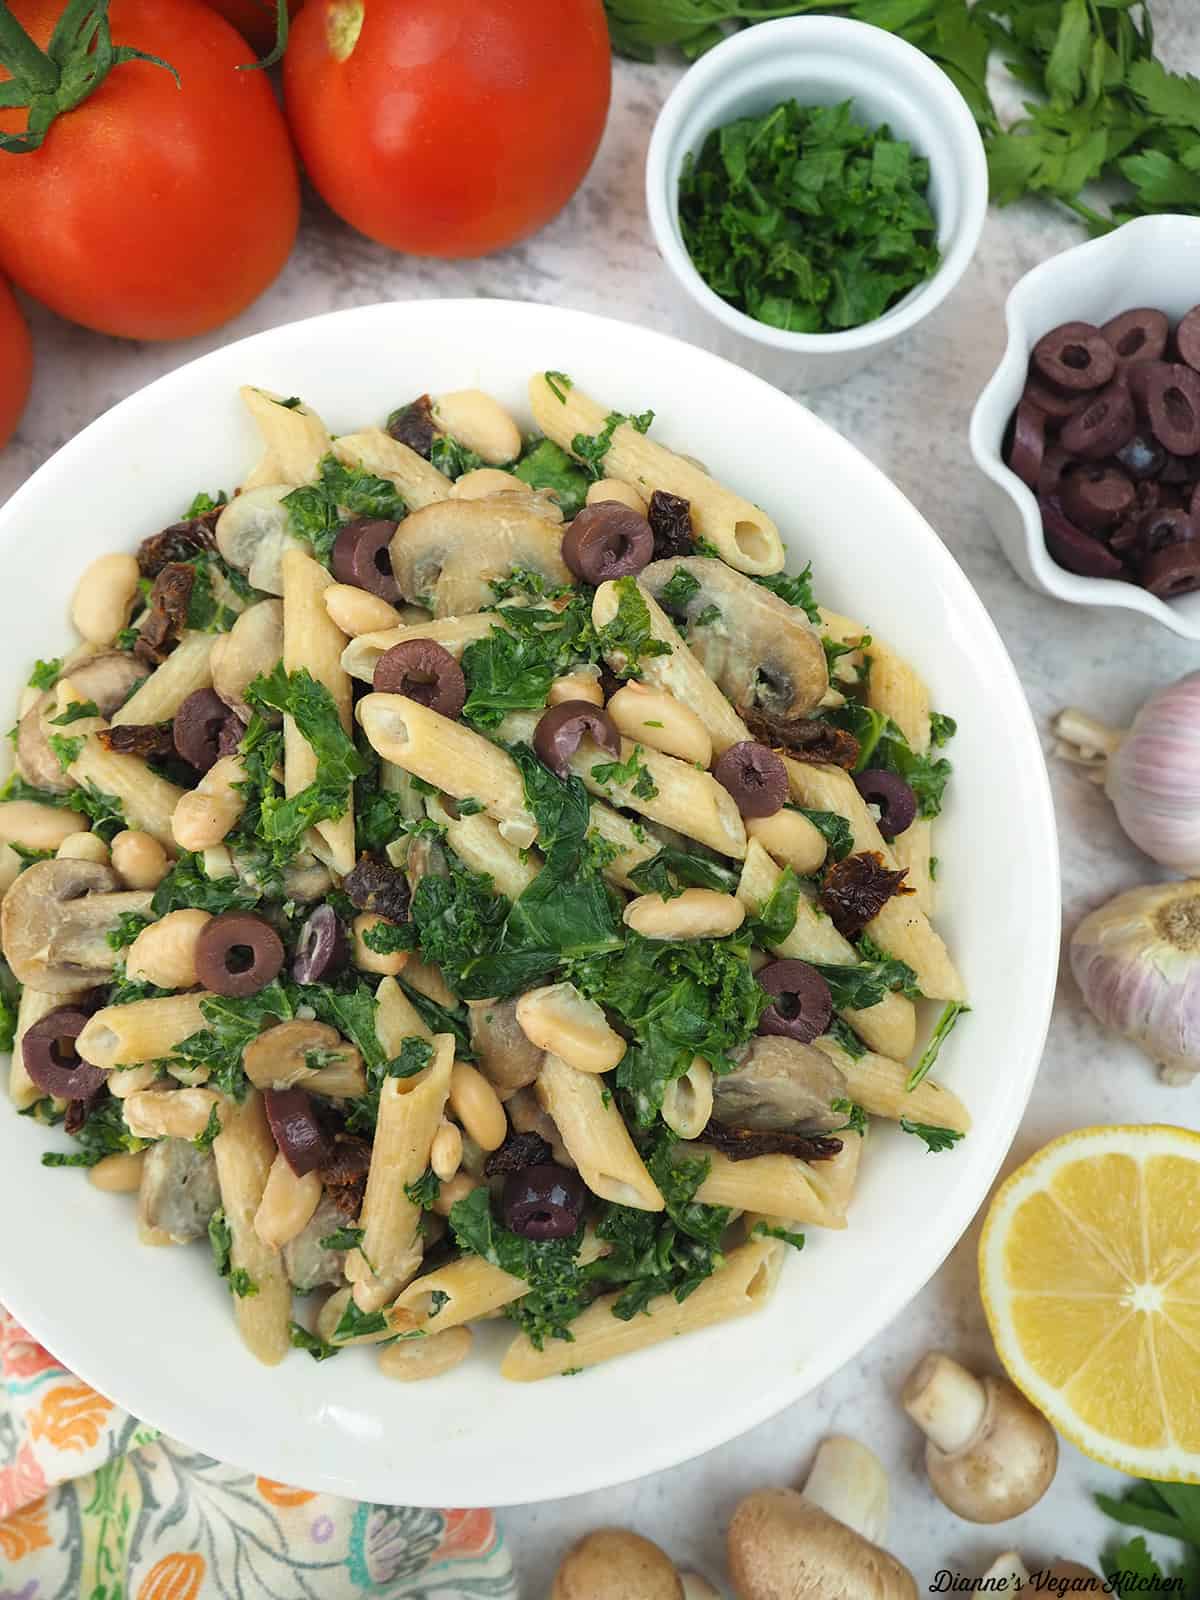 Creamy Vegan Pasta with tomatoes, parsley, olives, and mushrooms